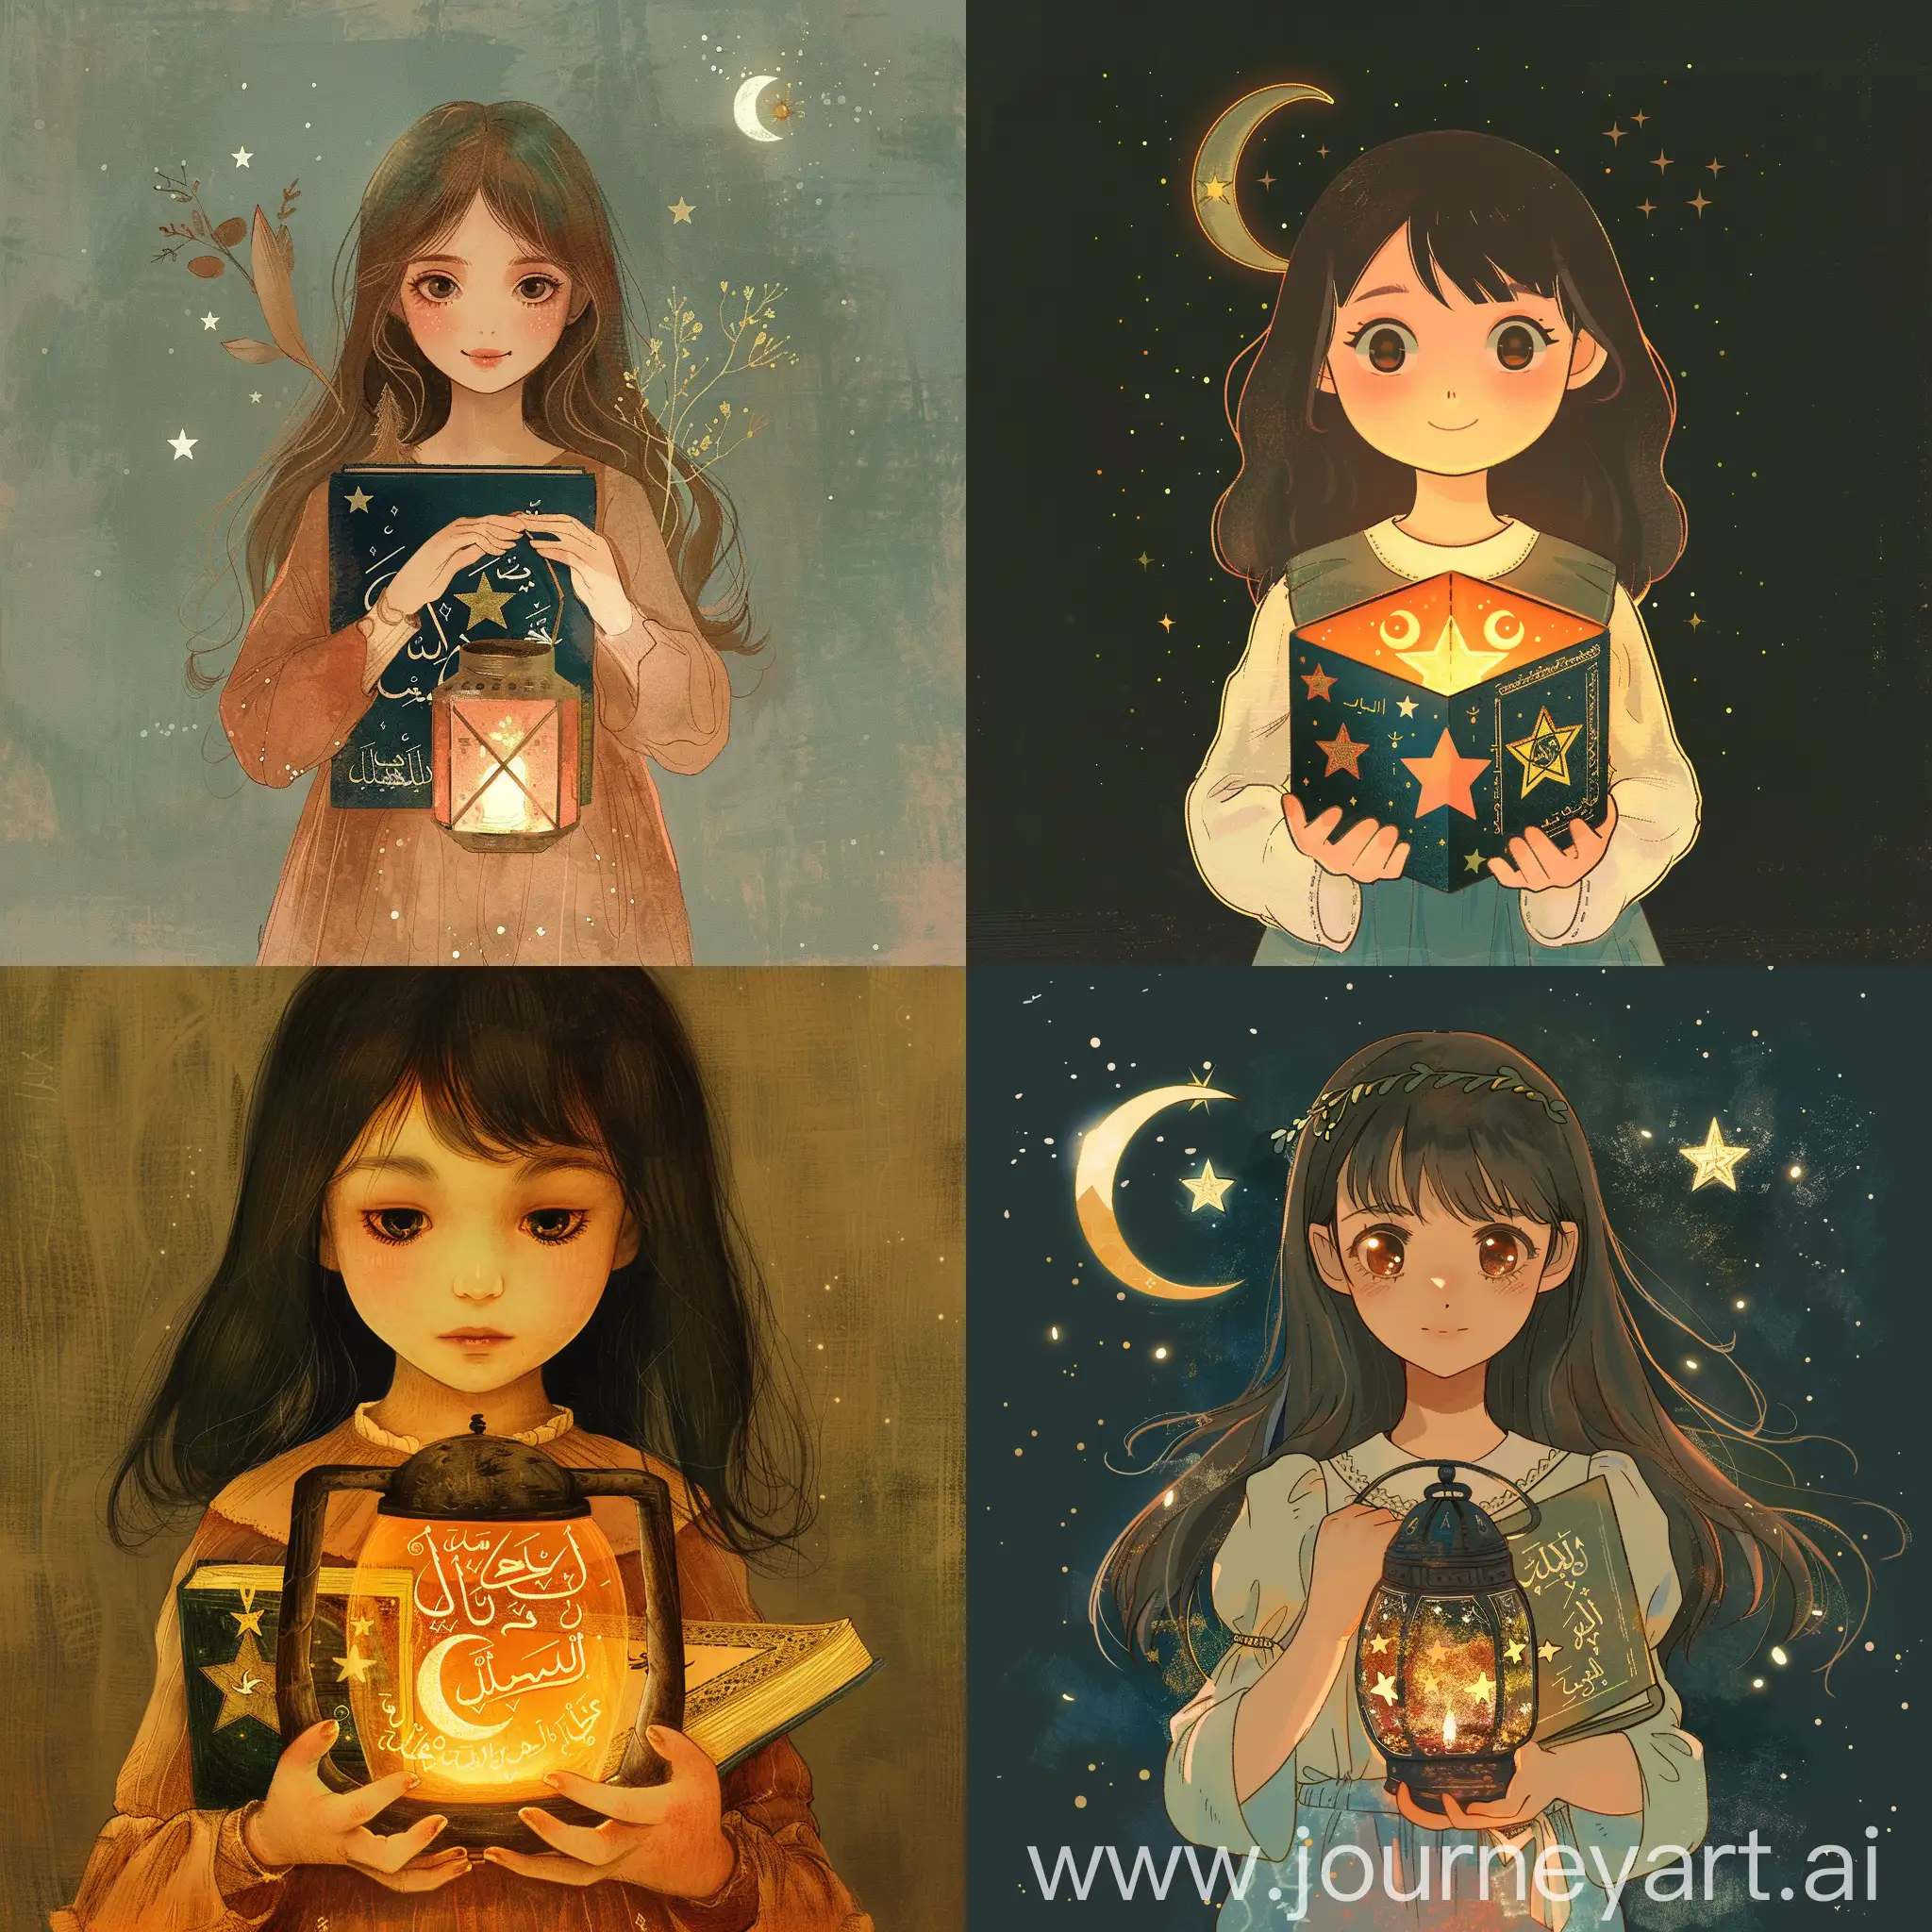 Young-Girl-Holding-Lantern-with-Crescent-Star-and-Quran